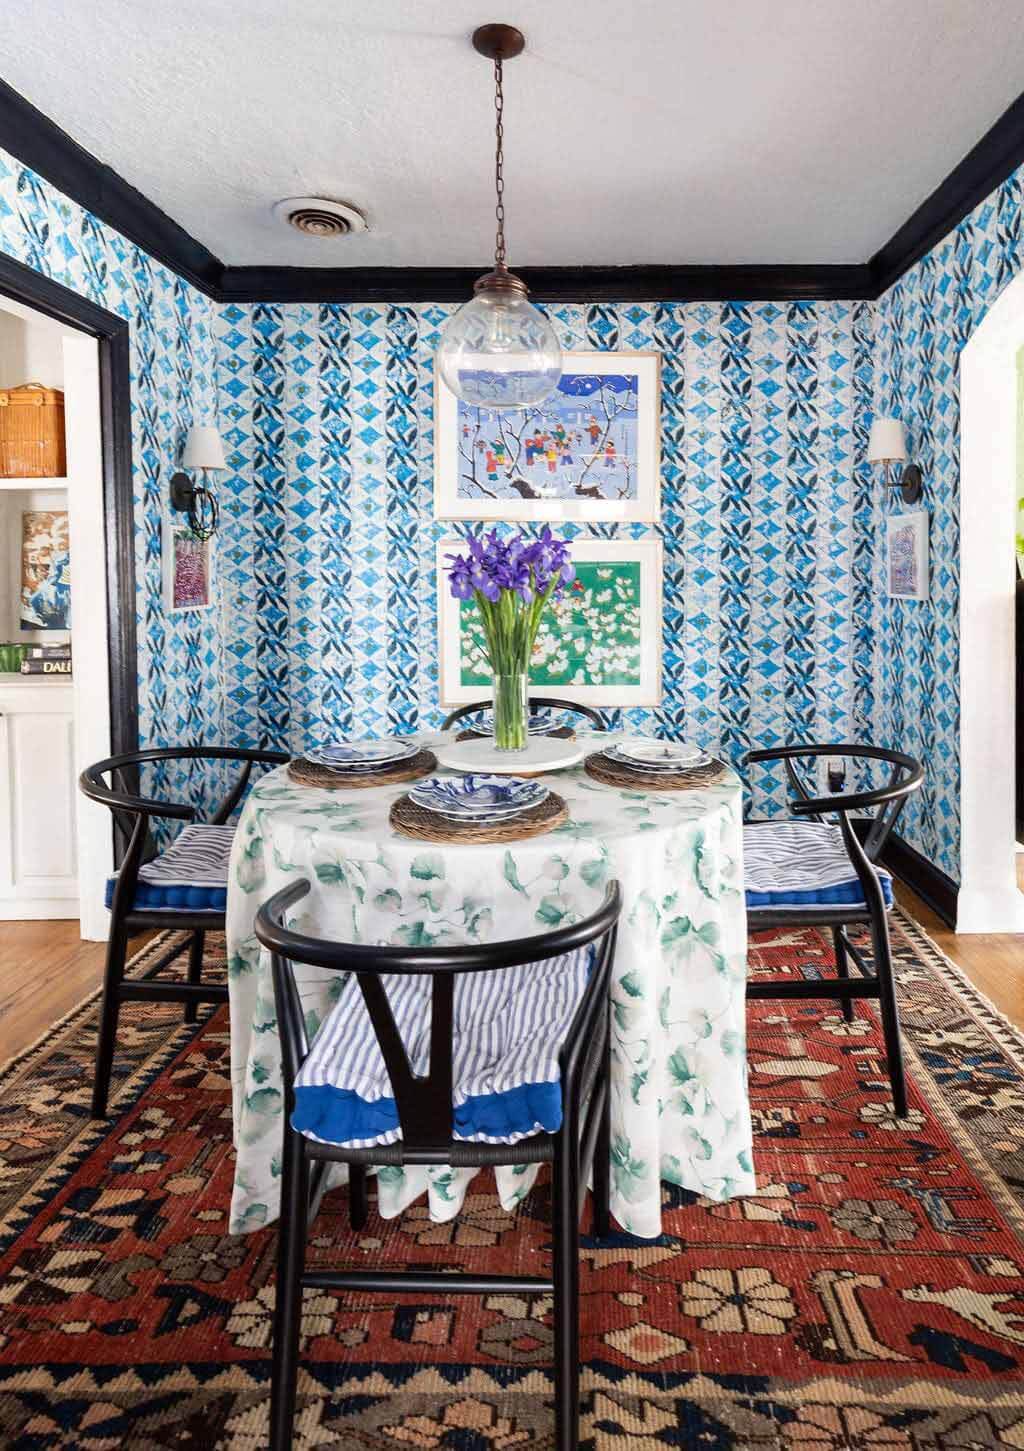 Dining room with blue block print wallpaper